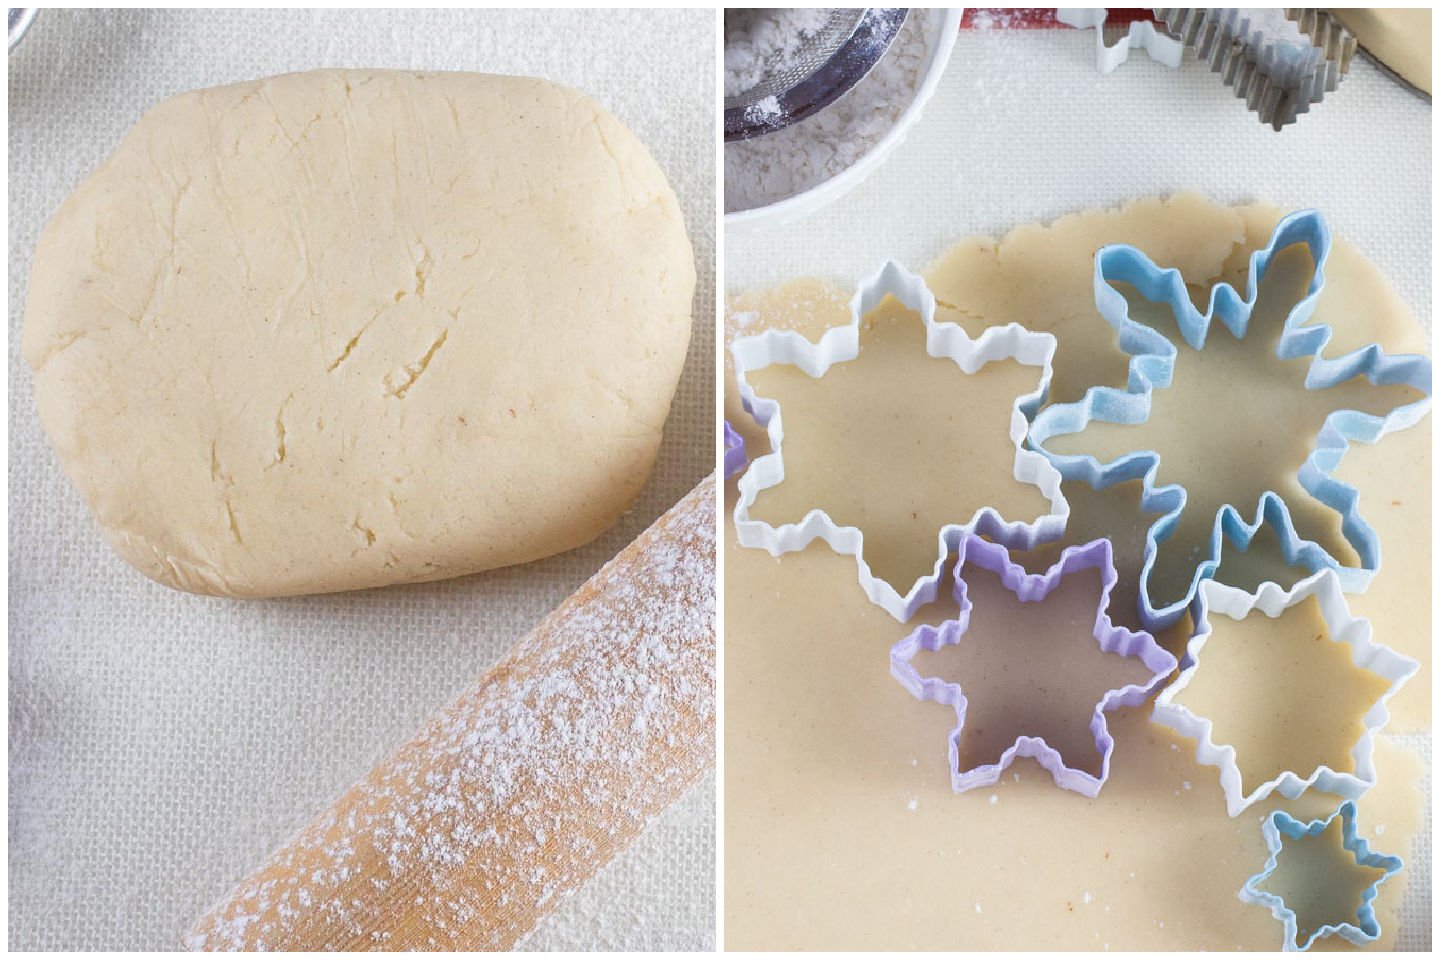 Disk of sugar cookie dough and rolled out cookie dough with cookie cutters.